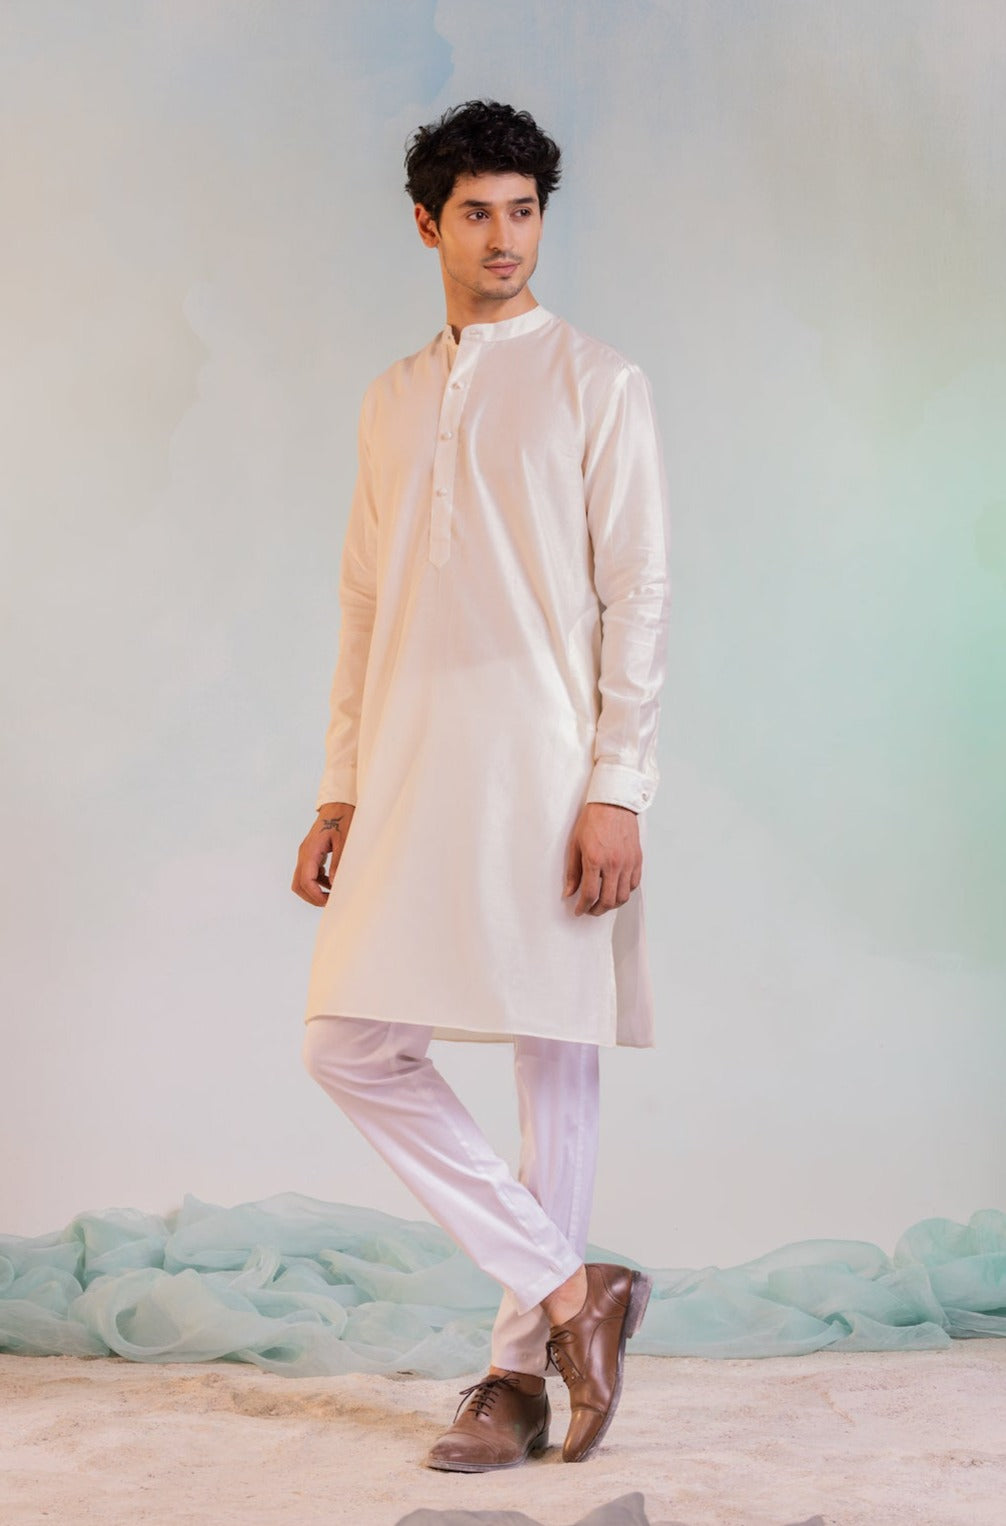 Buy Men's Handcrafted Apparels Online | Cotton Cottage India